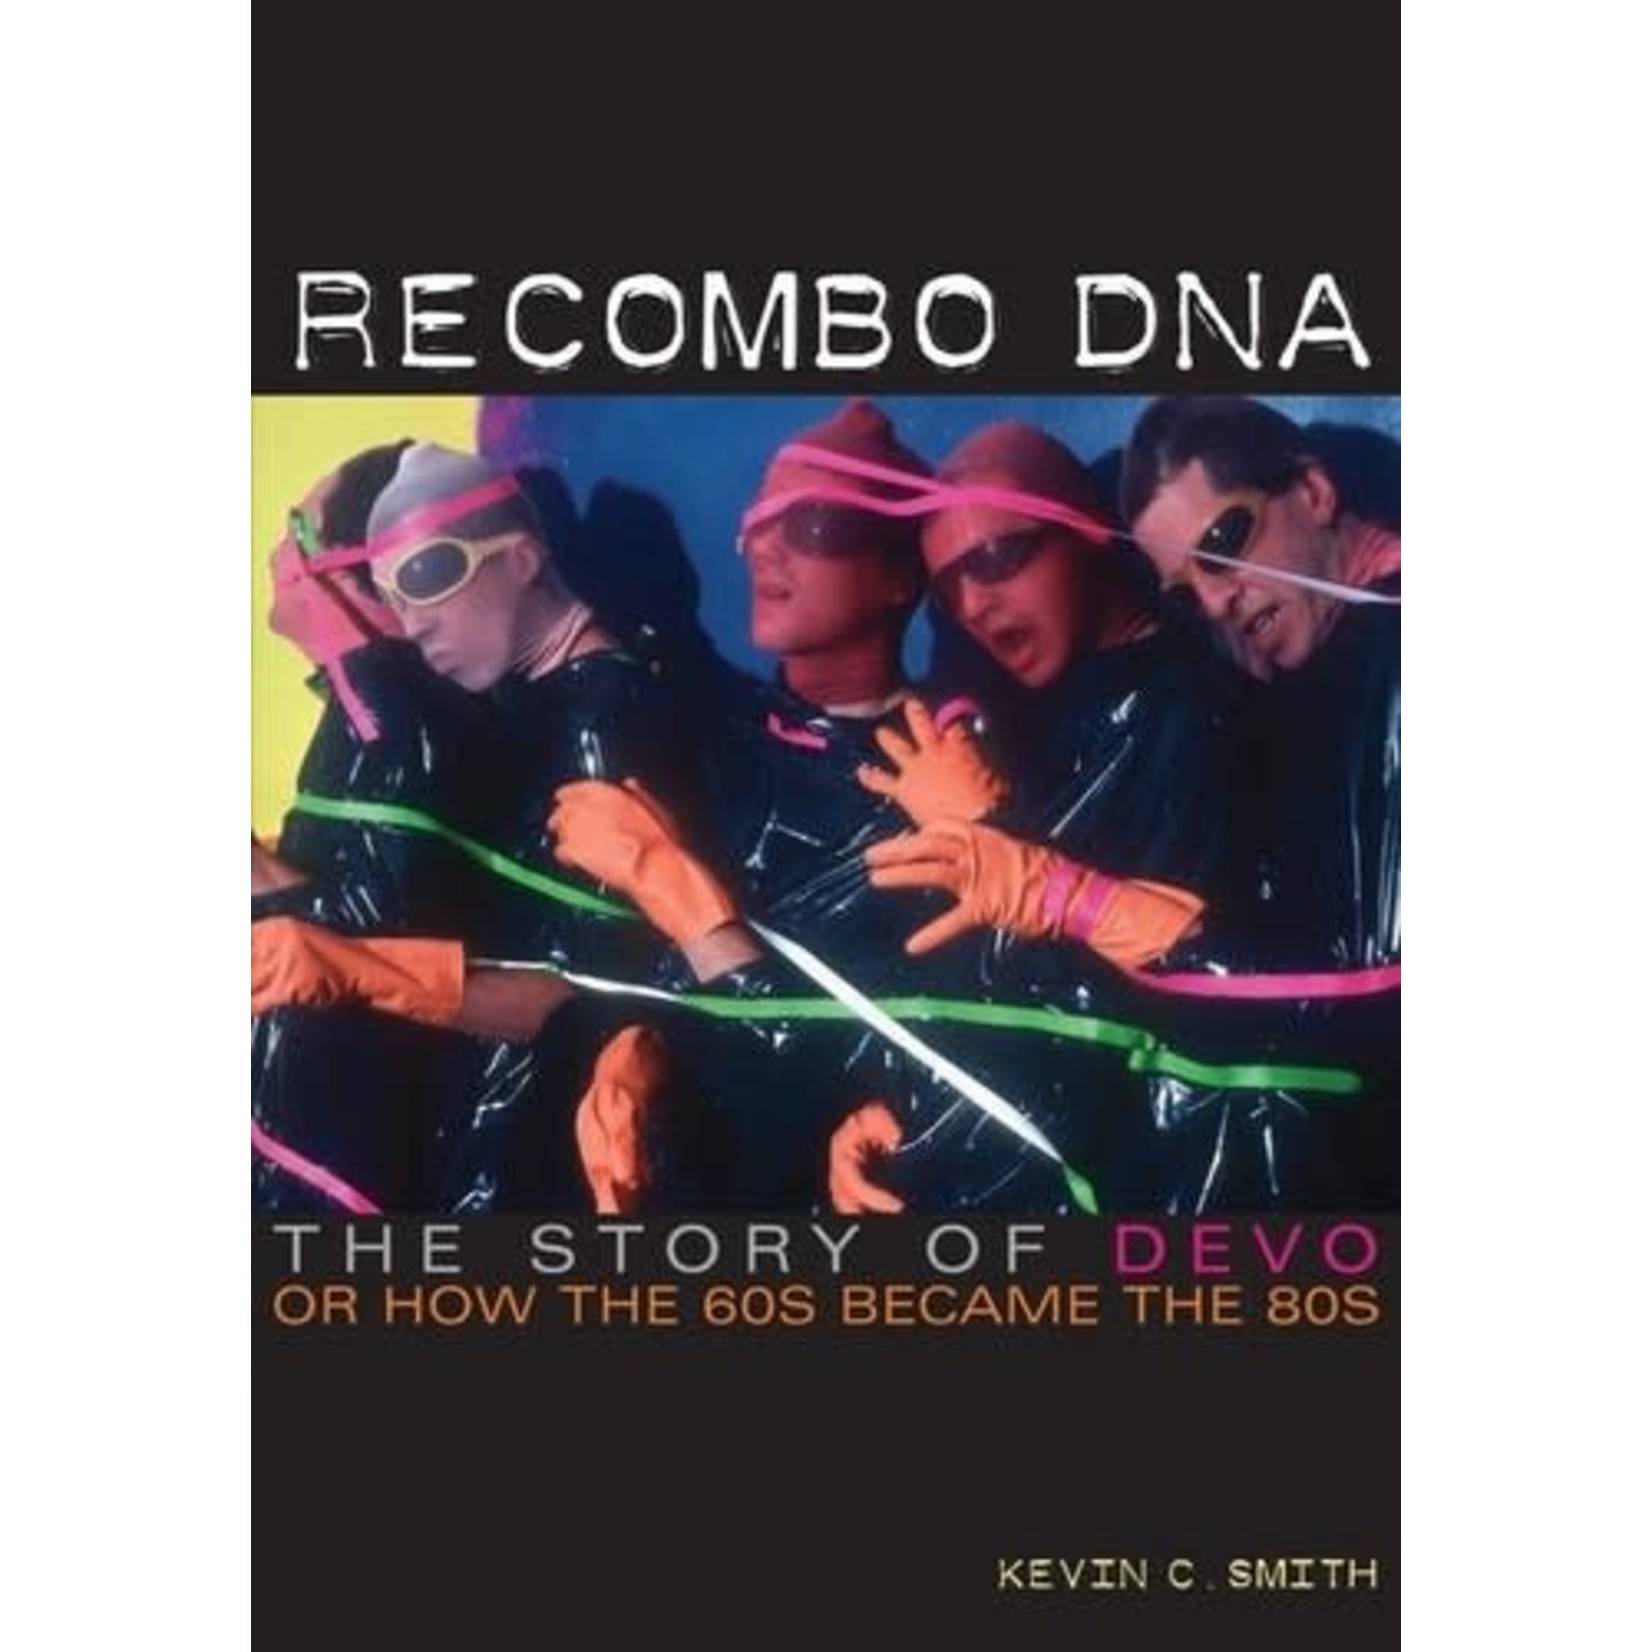 Kevin C Smith -  Recombo DNA: The Story of Devo, or How the 60s Became the 80s (Book)